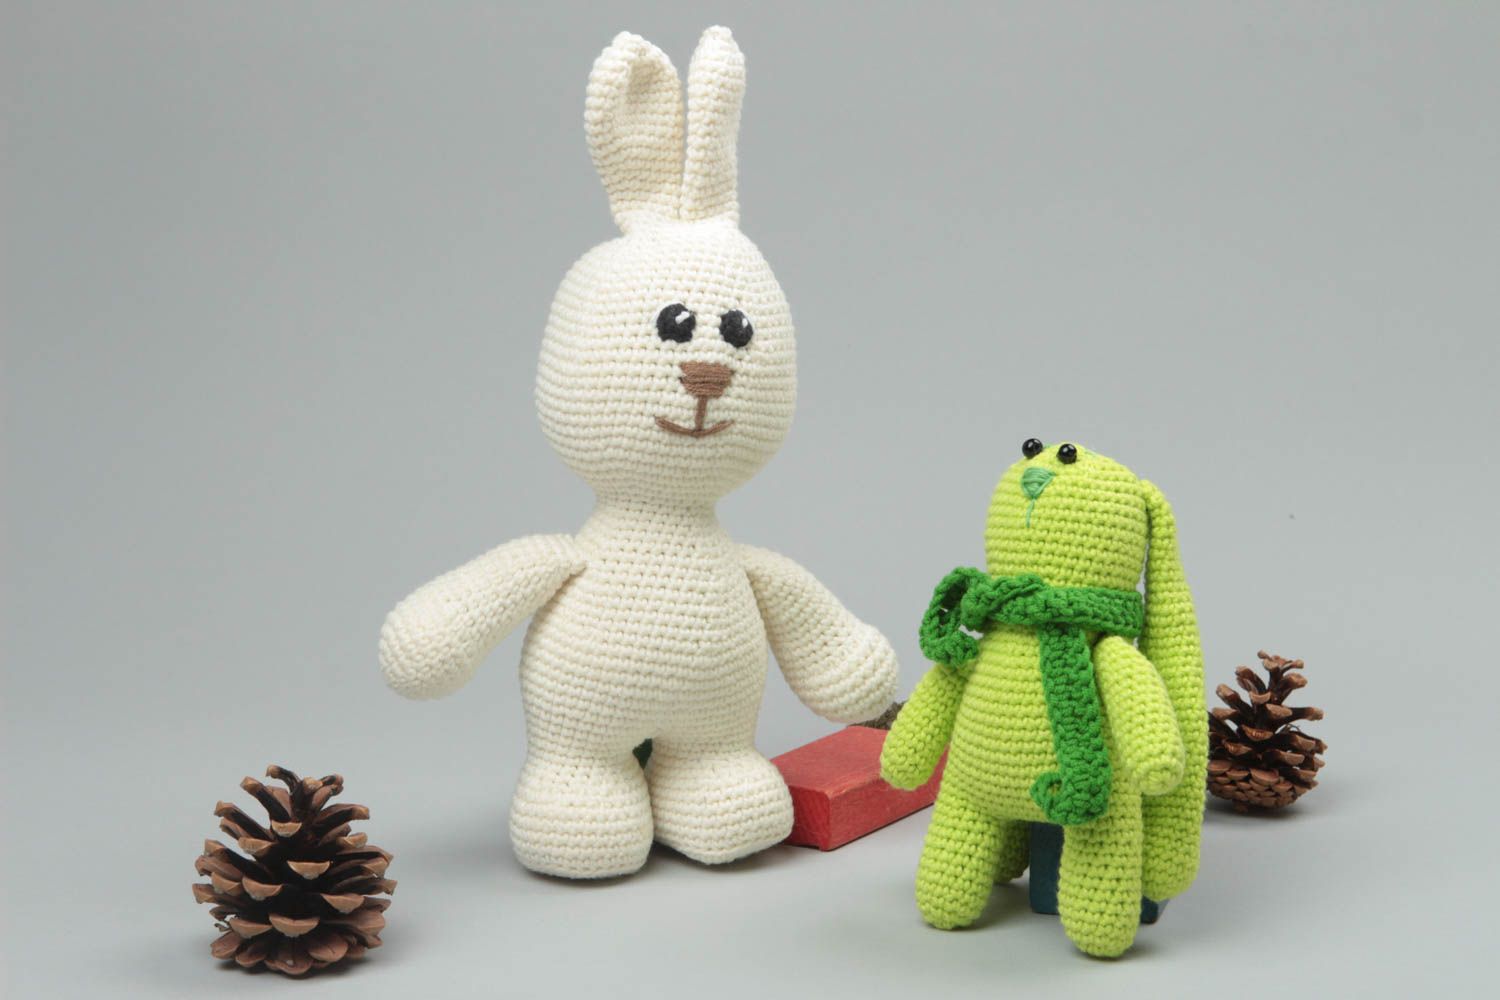 Beautiful handmade soft toy crochet toy 2 pieces best toys for kids gift ideas photo 1